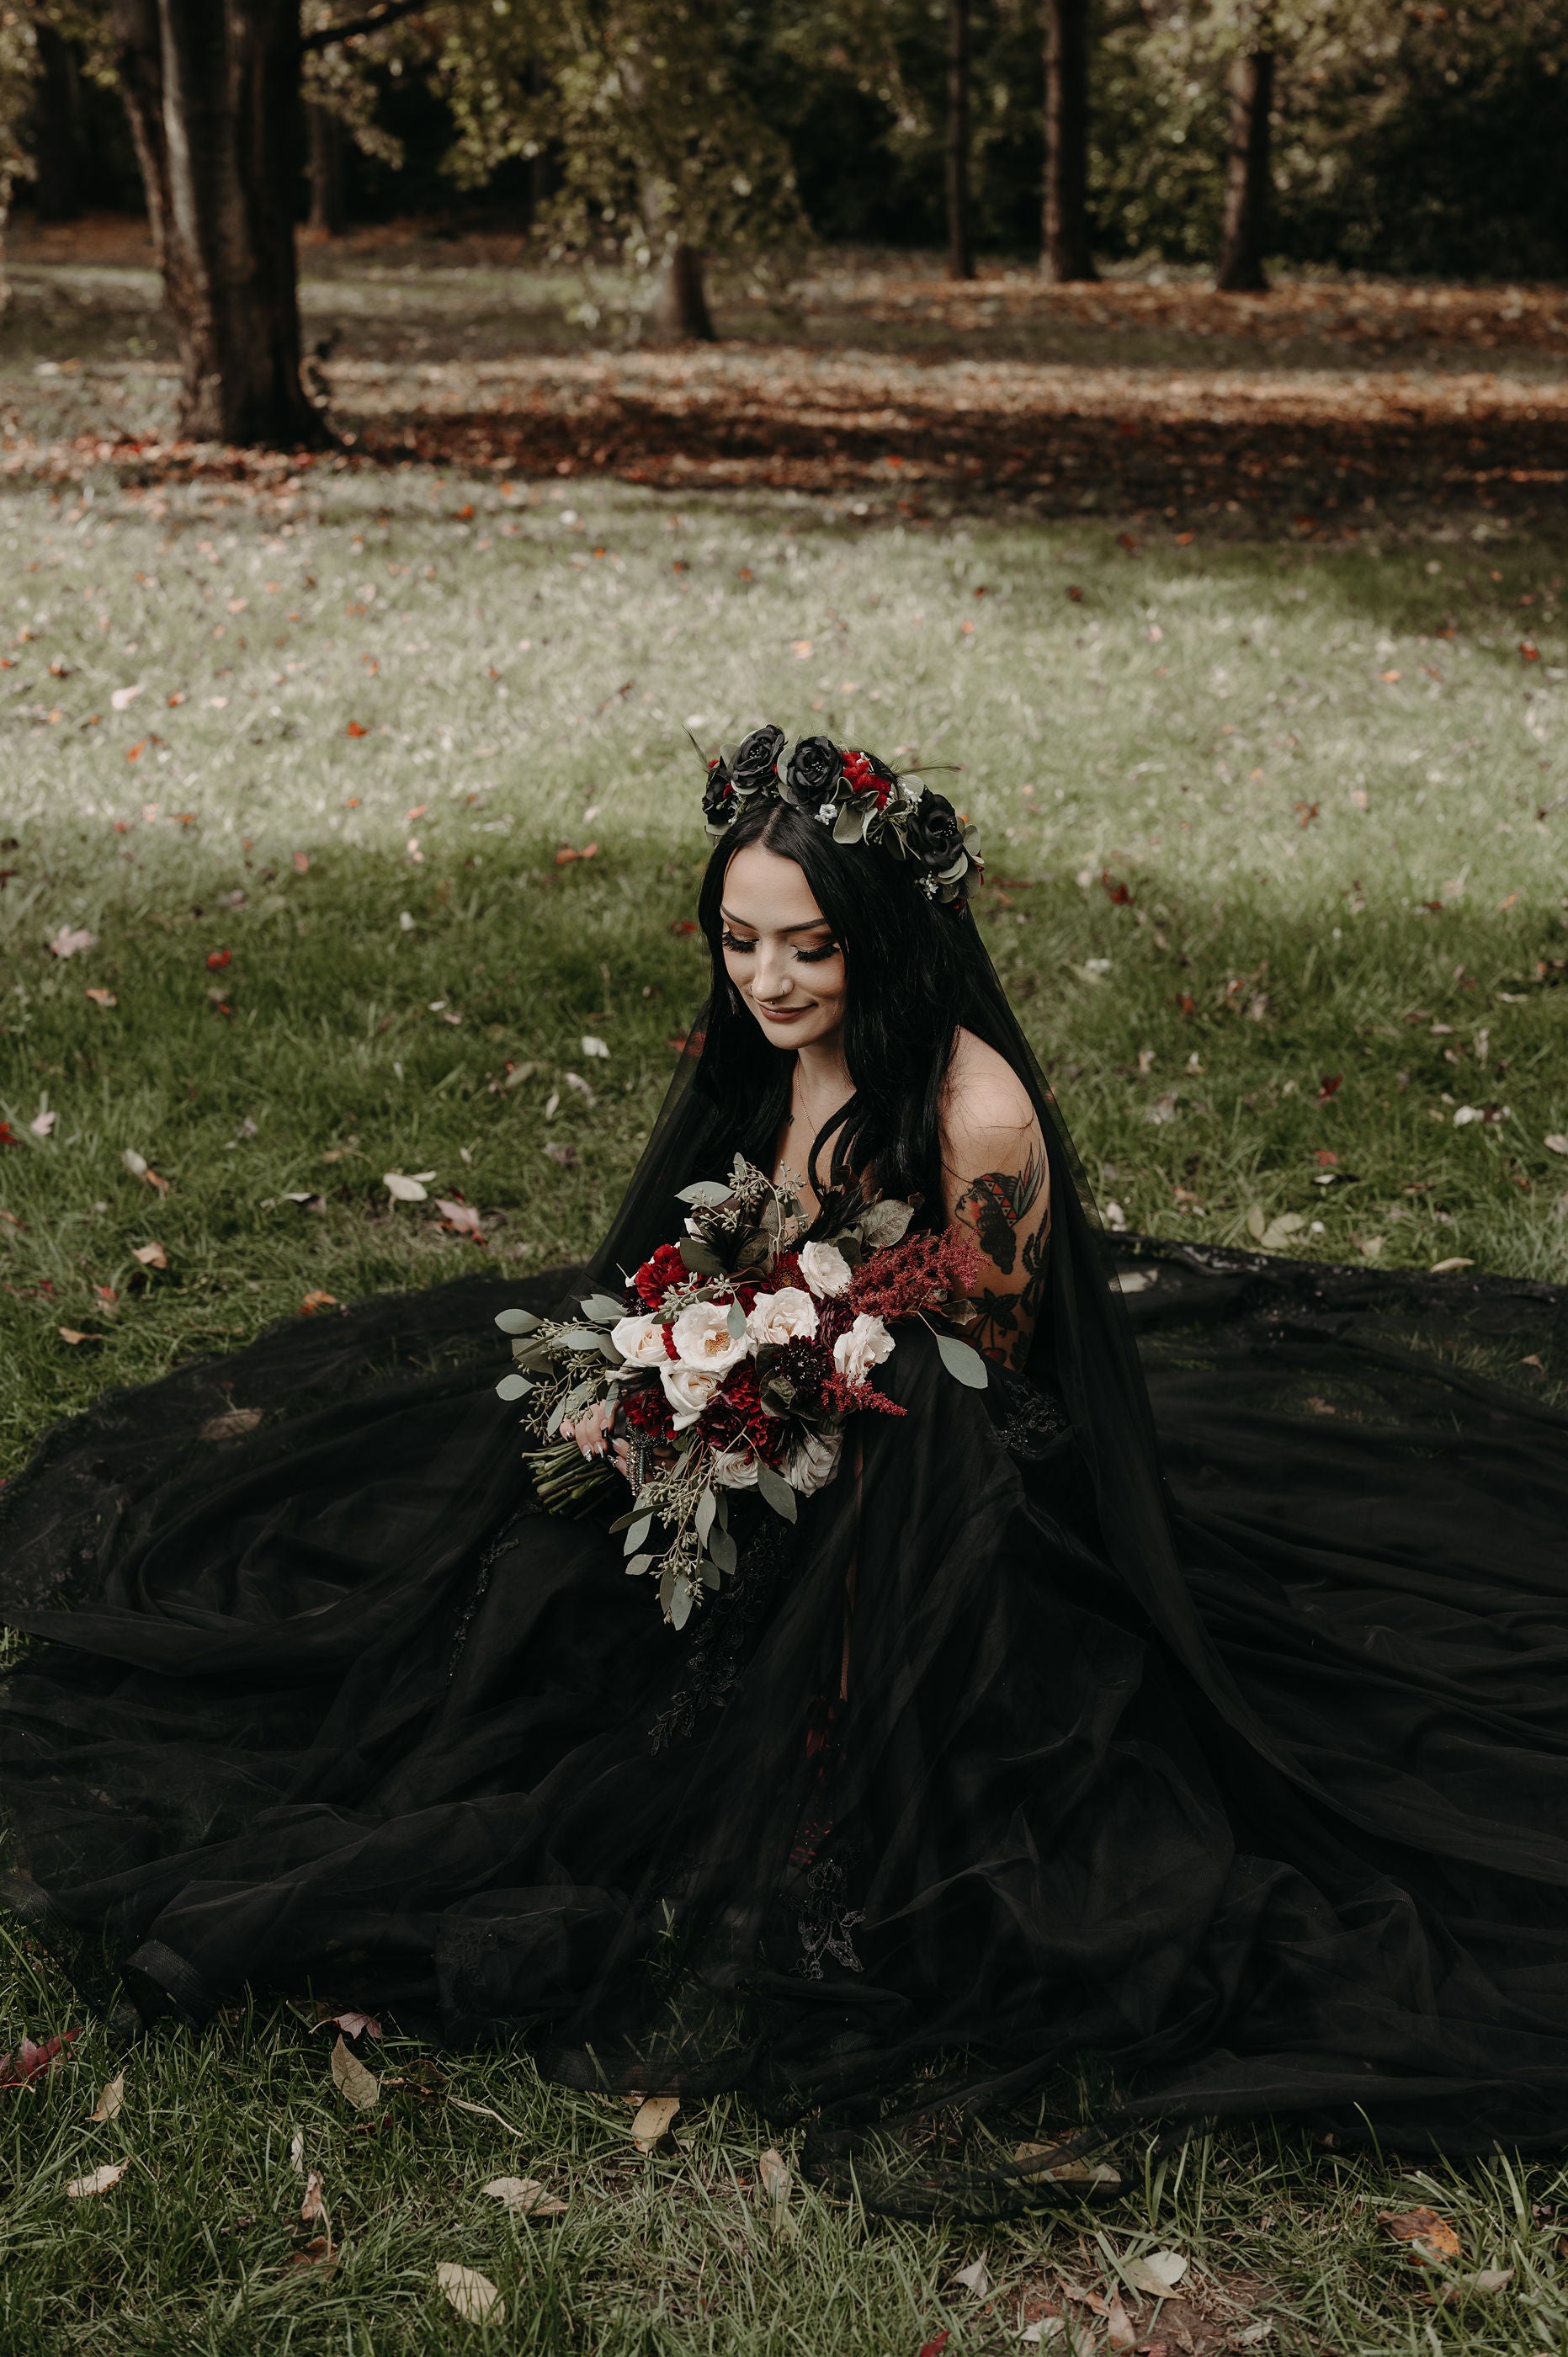 What Does a Black Wedding Dress Mean?